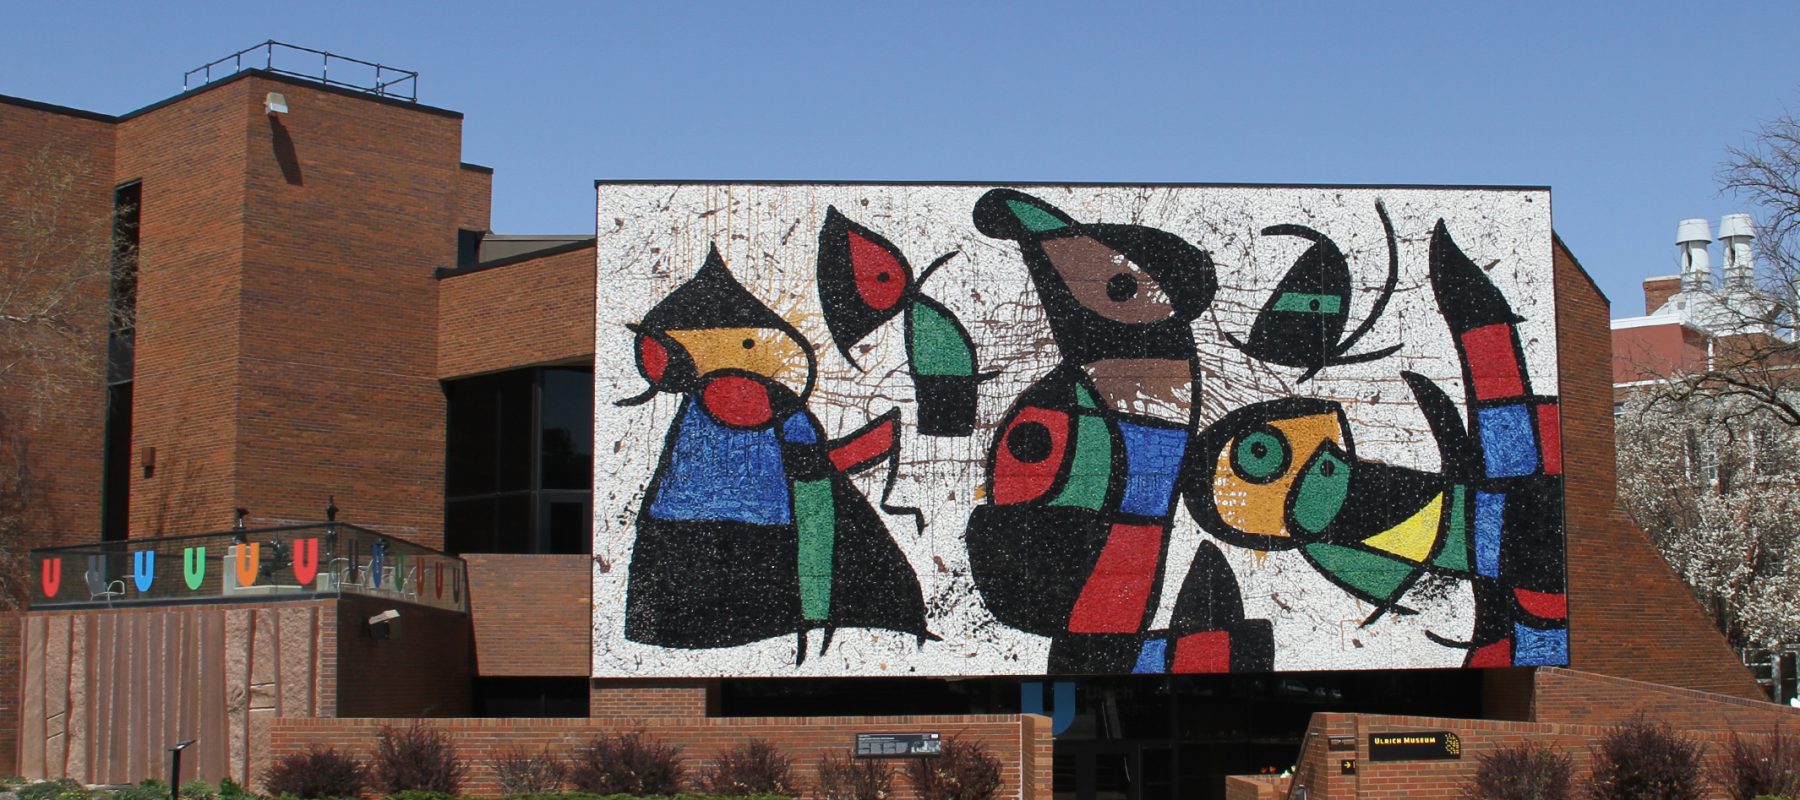 The front of the Ulrich Museum is pictured with a large, glass mural, Personnage Oiseaux, by Joan Miro.